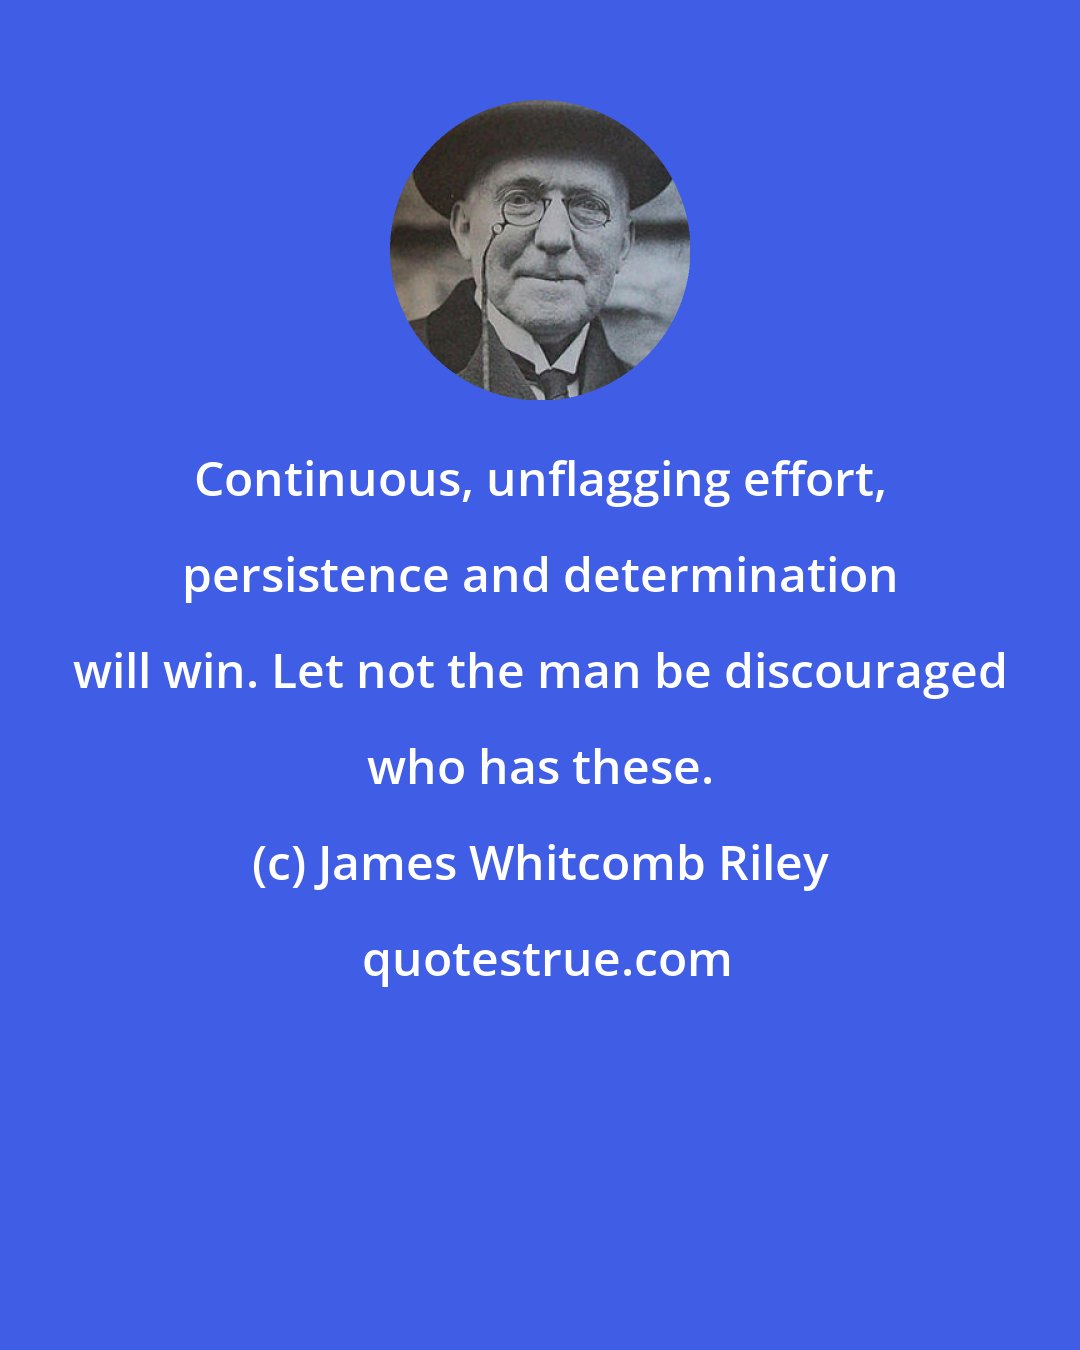 James Whitcomb Riley: Continuous, unflagging effort, persistence and determination will win. Let not the man be discouraged who has these.